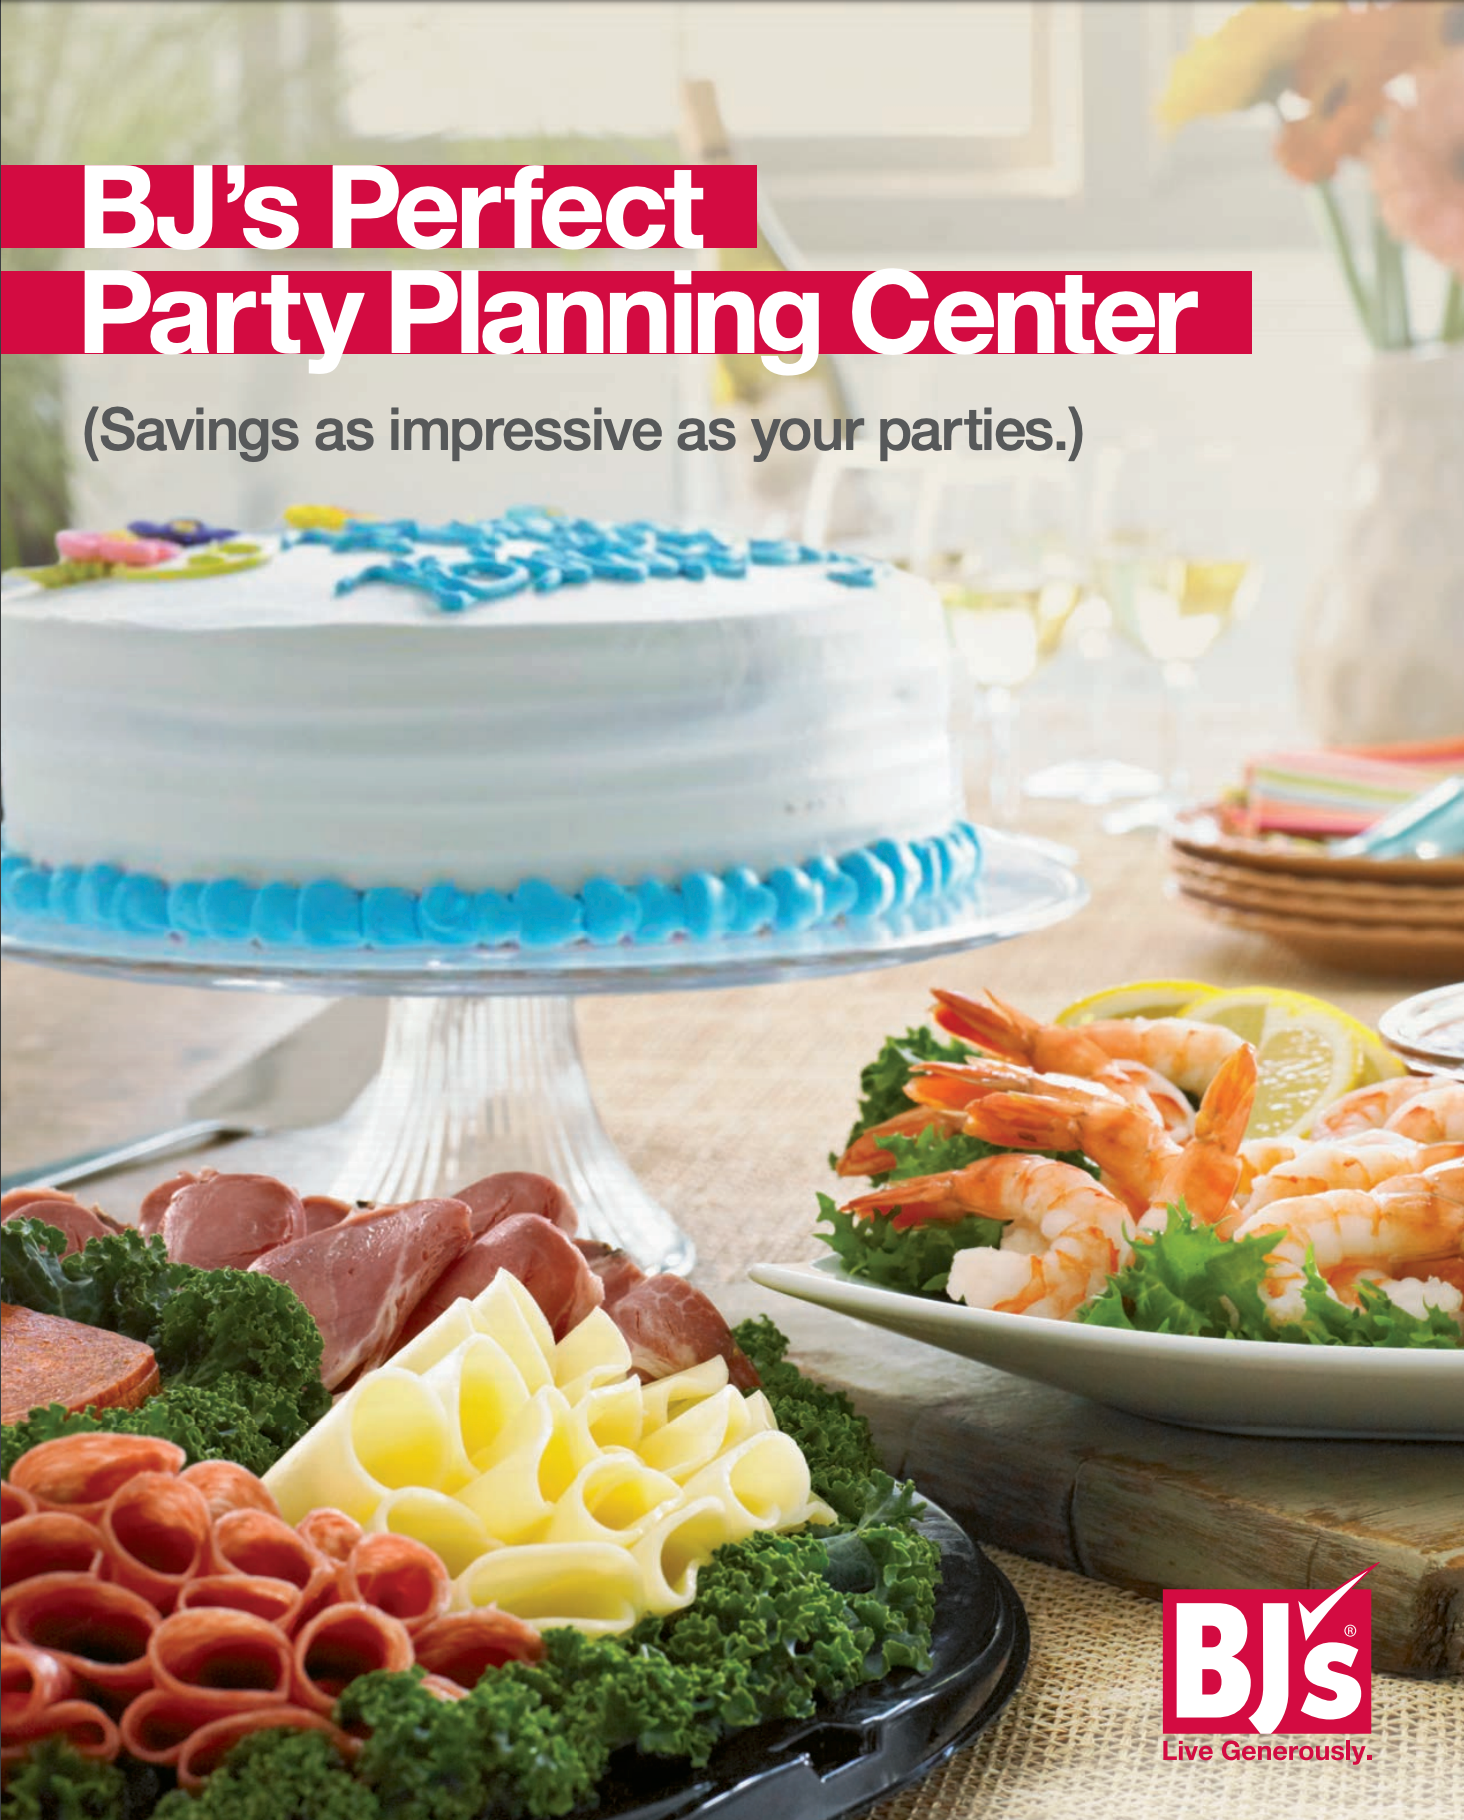 Grab a Cake from BJ’s Bakery for Your Next Event